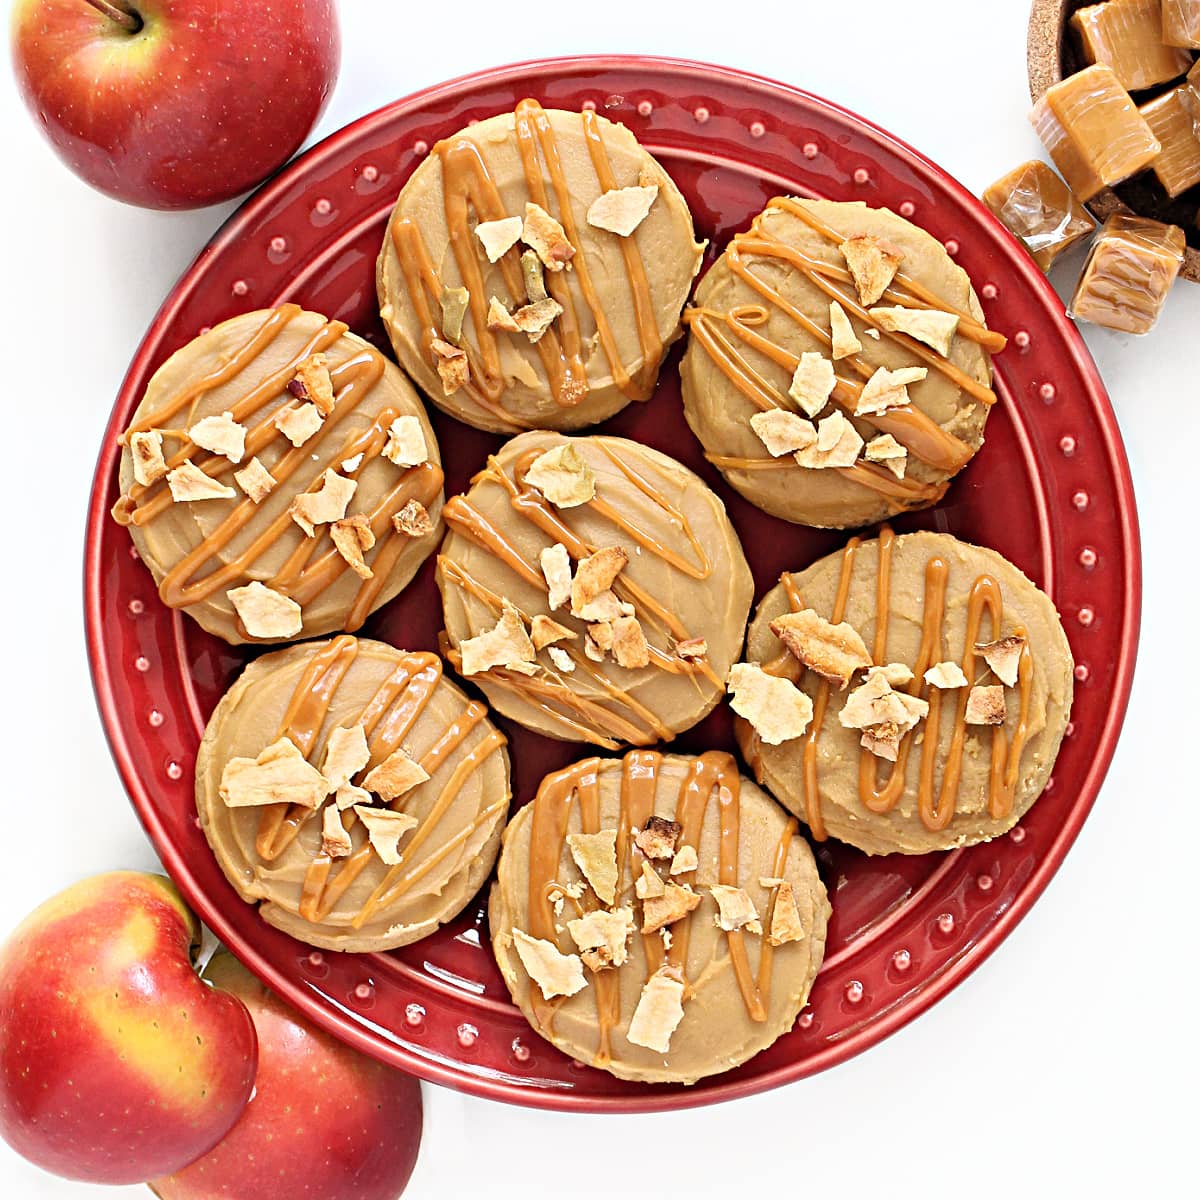 Frosted cookies, drizzled with caramel and dried apple chips on a red serving plate.